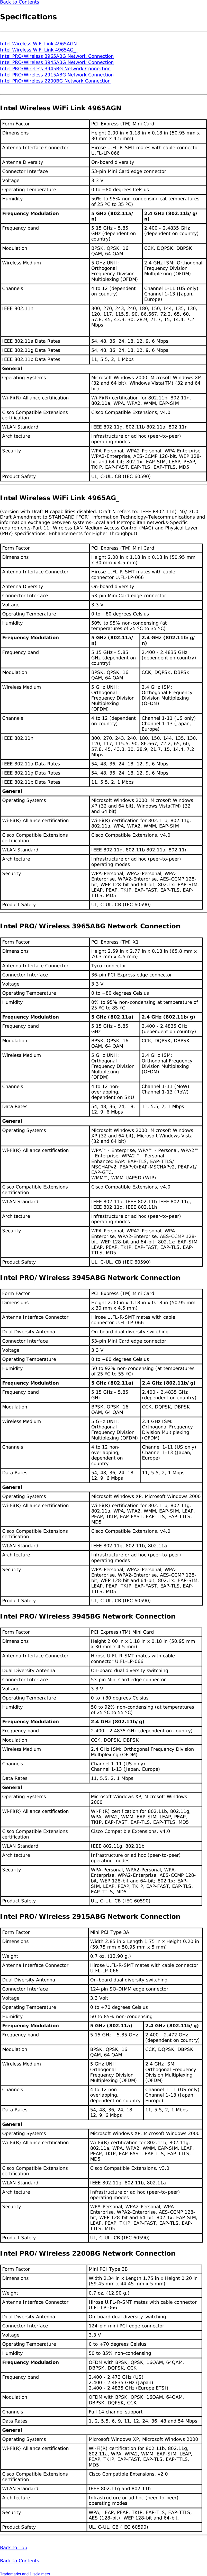 Back to Contents SpecificationsIntel Wireless WiFi Link 4965AGN Intel Wireless WiFi Link 4965AG_ Intel PRO/Wireless 3965ABG Network Connection Intel PRO/Wireless 3945ABG Network Connection Intel PRO/Wireless 3945BG Network Connection Intel PRO/Wireless 2915ABG Network Connection Intel PRO/Wireless 2200BG Network ConnectionIntel Wireless WiFi Link 4965AGNForm Factor PCI Express (TM) Mini Card Dimensions Height 2.00 in x 1.18 in x 0.18 in (50.95 mm x 30 mm x 4.5 mm) Antenna Interface Connector Hirose U.FL-R-SMT mates with cable connector U.FL-LP-066 Antenna Diversity  On-board diversity Connector Interface 53-pin Mini Card edge connector Voltage 3.3 V Operating Temperature 0 to +80 degrees Celsius Humidity 50% to 95% non-condensing (at temperatures of 25 ºC to 35 ºC)Frequency Modulation 5 GHz (802.11a/n) 2.4 GHz (802.11b/g/n) Frequency band 5.15 GHz - 5.85 GHz (dependent on country) 2.400 - 2.4835 GHz (dependent on country)Modulation BPSK, QPSK, 16 QAM, 64 QAM CCK, DQPSK, DBPSKWireless Medium 5 GHz UNII: Orthogonal Frequency Division Multiplexing (OFDM) 2.4 GHz ISM: Orthogonal Frequency Division Multiplexing (OFDM)Channels 4 to 12 (dependent on country) Channel 1-11 (US only) Channel 1-13 (Japan, Europe)IEEE 802.11n  300, 270, 243, 240, 180, 150, 144, 135, 130, 120, 117, 115.5, 90, 86.667, 72.2, 65, 60, 57.8, 45, 43.3, 30, 28.9, 21.7, 15, 14.4, 7.2 Mbps IEEE 802.11a Data Rates  54, 48, 36, 24, 18, 12, 9, 6 MbpsIEEE 802.11g Data Rates  54, 48, 36, 24, 18, 12, 9, 6 MbpsIEEE 802.11b Data Rates 11, 5.5, 2, 1 Mbps GeneralOperating Systems Microsoft Windows 2000. Microsoft Windows XP (32 and 64 bit). Windows Vista(TM) (32 and 64 bit) Wi-Fi(R) Alliance certification Wi-Fi(R) certification for 802.11b, 802.11g, 802.11a, WPA, WPA2, WMM, EAP-SIM Cisco Compatible Extensions certification Cisco Compatible Extensions, v4.0WLAN Standard IEEE 802.11g, 802.11b 802.11a, 802.11n Architecture Infrastructure or ad hoc (peer-to-peer) operating modesSecurity WPA-Personal, WPA2-Personal, WPA-Enterprise, WPA2-Enterprise, AES-CCMP 128-bit, WEP 128-bit and 64-bit; 802.1x: EAP-SIM, LEAP, PEAP, TKIP, EAP-FAST, EAP-TLS, EAP-TTLS, MD5 Product Safety UL, C-UL, CB (IEC 60590)Intel Wireless WiFi Link 4965AG_(version with Draft N capabilities disabled. Draft N refers to: IEEE P802.11n(TM)/D1.0 Draft Amendment to STANDARD [FOR] Information Technology-Telecommunications and information exchange between systems-Local and Metropolitan networks-Specific requirements-Part 11: Wireless LAN Medium Access Control (MAC) and Physical Layer (PHY) specifications: Enhancements for Higher Throughput)Form Factor PCI Express (TM) Mini Card Dimensions Height 2.00 in x 1.18 in x 0.18 in (50.95 mm x 30 mm x 4.5 mm) Antenna Interface Connector Hirose U.FL-R-SMT mates with cable connector U.FL-LP-066 Antenna Diversity  On-board diversity Connector Interface 53-pin Mini Card edge connector Voltage 3.3 V Operating Temperature 0 to +80 degrees Celsius Humidity 50% to 95% non-condensing (at temperatures of 25 ºC to 35 ºC)Frequency Modulation 5 GHz (802.11a/n) 2.4 GHz (802.11b/g/n) Frequency band 5.15 GHz - 5.85 GHz (dependent on country) 2.400 - 2.4835 GHz (dependent on country)Modulation BPSK, QPSK, 16 QAM, 64 QAM CCK, DQPSK, DBPSKWireless Medium 5 GHz UNII: Orthogonal Frequency Division Multiplexing (OFDM) 2.4 GHz ISM: Orthogonal Frequency Division Multiplexing (OFDM)Channels 4 to 12 (dependent on country)  Channel 1-11 (US only) Channel 1-13 (Japan, Europe)IEEE 802.11n  300, 270, 243, 240, 180, 150, 144, 135, 130, 120, 117, 115.5, 90, 86.667, 72.2, 65, 60, 57.8, 45, 43.3, 30, 28.9, 21.7, 15, 14.4, 7.2 Mbps IEEE 802.11a Data Rates  54, 48, 36, 24, 18, 12, 9, 6 MbpsIEEE 802.11g Data Rates  54, 48, 36, 24, 18, 12, 9, 6 MbpsIEEE 802.11b Data Rates 11, 5.5, 2, 1 Mbps GeneralOperating Systems Microsoft Windows 2000. Microsoft Windows XP (32 and 64 bit). Windows Vista(TM) (32 and 64 bit) Wi-Fi(R) Alliance certification Wi-Fi(R) certification for 802.11b, 802.11g, 802.11a, WPA, WPA2, WMM, EAP-SIM Cisco Compatible Extensions certification Cisco Compatible Extensions, v4.0WLAN Standard IEEE 802.11g, 802.11b 802.11a, 802.11n Architecture Infrastructure or ad hoc (peer-to-peer) operating modesSecurity WPA-Personal, WPA2-Personal, WPA-Enterprise, WPA2-Enterprise, AES-CCMP 128-bit, WEP 128-bit and 64-bit; 802.1x: EAP-SIM, LEAP, PEAP, TKIP, EAP-FAST, EAP-TLS, EAP-TTLS, MD5 Product Safety UL, C-UL, CB (IEC 60590)Intel PRO/Wireless 3965ABG Network ConnectionForm Factor PCI Express (TM) X1 Dimensions Height 2.59 in x 2.77 in x 0.18 in (65.8 mm x 70.3 mm x 4.5 mm) Antenna Interface Connector Tyco connector Connector Interface 36-pin PCI Express edge connector Voltage 3.3 V Operating Temperature 0 to +80 degrees Celsius Humidity 0% to 95% non-condensing at temperature of  25 ºC to 85 ºCFrequency Modulation 5 GHz (802.11a) 2.4 GHz (802.11b/g) Frequency band 5.15 GHz - 5.85 GHz 2.400 - 2.4835 GHz (dependent on country)Modulation BPSK, QPSK, 16 QAM, 64 QAM CCK, DQPSK, DBPSKWireless Medium 5 GHz UNII: Orthogonal Frequency Division Multiplexing (OFDM) 2.4 GHz ISM: Orthogonal Frequency Division Multiplexing (OFDM)Channels 4 to 12 non-overlapping, dependent on SKU Channel 1-11 (MoW) Channel 1-13 (RoW)Data Rates 54, 48, 36, 24, 18, 12, 9, 6 Mbps 11, 5.5, 2, 1 MbpsGeneralOperating Systems Microsoft Windows 2000. Microsoft Windows XP (32 and 64 bit), Microsoft Windows Vista (32 and 64 bit) Wi-Fi(R) Alliance certification WPA™ - Enterprise, WPA™ - Personal, WPA2™ - Enterprise, WPA2™ - Personal Enhanced EAP: EAP-TLS, EAP-TTLS/MSCHAPv2, PEAPv0/EAP-MSCHAPv2, PEAPv1/EAP-GTC,  WMM™, WMM-UAPSD (WIP)Cisco Compatible Extensions certification Cisco Compatible Extensions, v4.0WLAN Standard IEEE 802.11a, IEEE 802.11b IEEE 802.11g, IEEE 802.11d, IEEE 802.11h Architecture Infrastructure or ad hoc (peer-to-peer) operating modesSecurity WPA-Personal, WPA2-Personal, WPA-Enterprise, WPA2-Enterprise, AES-CCMP 128-bit, WEP 128-bit and 64-bit; 802.1x: EAP-SIM, LEAP, PEAP, TKIP, EAP-FAST, EAP-TLS, EAP-TTLS, MD5 Product Safety UL, C-UL, CB (IEC 60590)Intel PRO/Wireless 3945ABG Network ConnectionForm Factor PCI Express (TM) Mini Card Dimensions Height 2.00 in x 1.18 in x 0.18 in (50.95 mm x 30 mm x 4.5 mm) Antenna Interface Connector Hirose U.FL-R-SMT mates with cable connector U.FL-LP-066 Dual Diversity Antenna On-board dual diversity switching Connector Interface 53-pin Mini Card edge connector Voltage 3.3 V Operating Temperature 0 to +80 degrees Celsius Humidity 50 to 92% non-condensing (at temperatures of 25 ºC to 55 ºC) Frequency Modulation 5 GHz (802.11a) 2.4 GHz (802.11b/g) Frequency band 5.15 GHz - 5.85 GHz 2.400 - 2.4835 GHz (dependent on country)Modulation BPSK, QPSK, 16 QAM, 64 QAM CCK, DQPSK, DBPSKWireless Medium 5 GHz UNII: Orthogonal Frequency Division Multiplexing (OFDM)2.4 GHz ISM: Orthogonal Frequency Division Multiplexing (OFDM)Channels 4 to 12 non-overlapping, dependent on countryChannel 1-11 (US only) Channel 1-13 (Japan, Europe)Data Rates 54, 48, 36, 24, 18, 12, 9, 6 Mbps 11, 5.5, 2, 1 MbpsGeneralOperating Systems Microsoft Windows XP, Microsoft Windows 2000Wi-Fi(R) Alliance certification Wi-Fi(R) certification for 802.11b, 802.11g, 802.11a, WPA, WPA2, WMM, EAP-SIM, LEAP, PEAP, TKIP, EAP-FAST, EAP-TLS, EAP-TTLS, MD5Cisco Compatible Extensions certification Cisco Compatible Extensions, v4.0WLAN Standard IEEE 802.11g, 802.11b, 802.11aArchitecture Infrastructure or ad hoc (peer-to-peer) operating modesSecurity WPA-Personal, WPA2-Personal, WPA-Enterprise, WPA2-Enterprise, AES-CCMP 128-bit, WEP 128-bit and 64-bit; 802.1x: EAP-SIM, LEAP, PEAP, TKIP, EAP-FAST, EAP-TLS, EAP-TTLS, MD5 Product Safety UL, C-UL, CB (IEC 60590)Intel PRO/Wireless 3945BG Network ConnectionForm Factor PCI Express (TM) Mini Card Dimensions Height 2.00 in x 1.18 in x 0.18 in (50.95 mm x 30 mm x 4.5 mm) Antenna Interface Connector Hirose U.FL-R-SMT mates with cable connector U.FL-LP-066 Dual Diversity Antenna On-board dual diversity switching Connector Interface 53-pin Mini Card edge connector Voltage 3.3 V Operating Temperature 0 to +80 degrees Celsius Humidity 50 to 92% non-condensing (at temperatures of 25 ºC to 55 ºC) Frequency Modulation 2.4 GHz (802.11b/g) Frequency band 2.400 - 2.4835 GHz (dependent on country)Modulation CCK, DQPSK, DBPSKWireless Medium 2.4 GHz ISM: Orthogonal Frequency Division Multiplexing (OFDM)Channels Channel 1-11 (US only) Channel 1-13 (Japan, Europe)Data Rates 11, 5.5, 2, 1 MbpsGeneralOperating Systems Microsoft Windows XP, Microsoft Windows 2000Wi-Fi(R) Alliance certification Wi-Fi(R) certification for 802.11b, 802.11g, WPA, WPA2, WMM, EAP-SIM, LEAP, PEAP, TKIP, EAP-FAST, EAP-TLS, EAP-TTLS, MD5Cisco Compatible Extensions certification Cisco Compatible Extensions, v4.0WLAN Standard IEEE 802.11g, 802.11bArchitecture Infrastructure or ad hoc (peer-to-peer) operating modesSecurity WPA-Personal, WPA2-Personal, WPA-Enterprise, WPA2-Enterprise, AES-CCMP 128-bit, WEP 128-bit and 64-bit; 802.1x: EAP-SIM, LEAP, PEAP, TKIP, EAP-FAST, EAP-TLS, EAP-TTLS, MD5 Product Safety UL, C-UL, CB (IEC 60590)Intel PRO/Wireless 2915ABG Network ConnectionForm Factor Mini PCI Type 3ADimensions Width 2.85 in x Length 1.75 in x Height 0.20 in (59.75 mm x 50.95 mm x 5 mm)Weight 0.7 oz. (12.90 g.)Antenna Interface Connector Hirose U.FL-R-SMT mates with cable connector U.FL-LP-066Dual Diversity Antenna On-board dual diversity switchingConnector Interface 124-pin SO-DIMM edge connectorVoltage 3.3 VoltOperating Temperature 0 to +70 degrees CelsiusHumidity 50 to 85% non-condensingFrequency Modulation 5 GHz (802.11a) 2.4 GHz (802.11b/g) Frequency band 5.15 GHz - 5.85 GHz 2.400 - 2.472 GHz (dependent on country)Modulation BPSK, QPSK, 16 QAM, 64 QAM CCK, DQPSK, DBPSKWireless Medium 5 GHz UNII: Orthogonal Frequency Division Multiplexing (OFDM)2.4 GHz ISM: Orthogonal Frequency Division Multiplexing (OFDM)Channels 4 to 12 non-overlapping, dependent on countryChannel 1-11 (US only) Channel 1-13 (Japan, Europe)Data Rates 54, 48, 36, 24, 18, 12, 9, 6 Mbps 11, 5.5, 2, 1 MbpsGeneralOperating Systems Microsoft Windows XP, Microsoft Windows 2000Wi-Fi(R) Alliance certification Wi-Fi(R) certification for 802.11b, 802.11g, 802.11a, WPA, WPA2, WMM, EAP-SIM, LEAP, PEAP, TKIP, EAP-FAST, EAP-TLS, EAP-TTLS, MD5Cisco Compatible Extensions certification  Cisco Compatible Extensions, v3.0WLAN Standard IEEE 802.11g, 802.11b, 802.11aArchitecture Infrastructure or ad hoc (peer-to-peer) operating modesSecurity WPA-Personal, WPA2-Personal, WPA-Enterprise, WPA2-Enterprise, AES-CCMP 128-bit, WEP 128-bit and 64-bit. 802.1x: EAP-SIM, LEAP, PEAP, TKIP, EAP-FAST, EAP-TLS, EAP-TTLS, MD5 Product Safety UL, C-UL, CB (IEC 60590)Intel PRO/Wireless 2200BG Network ConnectionForm Factor Mini PCI Type 3BDimensions Width 2.34 in x Length 1.75 in x Height 0.20 in (59.45 mm x 44.45 mm x 5 mm) Weight 0.7 oz. (12.90 g.) Antenna Interface Connector Hirose U.FL-R-SMT mates with cable connector U.FL-LP-066 Dual Diversity Antenna On-board dual diversity switching Connector Interface 124-pin mini PCI edge connector Voltage 3.3 VOperating Temperature 0 to +70 degrees Celsius Humidity 50 to 85% non-condensingFrequency Modulation OFDM with BPSK, QPSK, 16QAM, 64QAM, DBPSK, DQPSK, CCK Frequency band 2.400 - 2.472 GHz (US) 2.400 - 2.4835 GHz (Japan) 2.400 - 2.4835 GHz (Europe ETSI) Modulation OFDM with BPSK, QPSK, 16QAM, 64QAM, DBPSK, DQPSK, CCK Channels Full 14 channel support Data Rates 1, 2, 5.5, 6, 9, 11, 12, 24, 36, 48 and 54 Mbps GeneralOperating Systems Microsoft Windows XP, Microsoft Windows 2000Wi-Fi(R) Alliance certification Wi-Fi(R) certification for 802.11b, 802.11g, 802.11a, WPA, WPA2, WMM, EAP-SIM, LEAP, PEAP, TKIP, EAP-FAST, EAP-TLS, EAP-TTLS, MD5Cisco Compatible Extensions certification Cisco Compatible Extensions, v2.0WLAN Standard IEEE 802.11g and 802.11b Architecture Infrastructure or ad hoc (peer-to-peer) operating modesSecurity WPA, LEAP, PEAP, TKIP, EAP-TLS, EAP-TTLS, AES (128-bit), WEP 128-bit and 64-bit. Product Safety UL, C-UL, CB (IEC 60590)Back to Top Back to Contents Trademarks and Disclaimers 